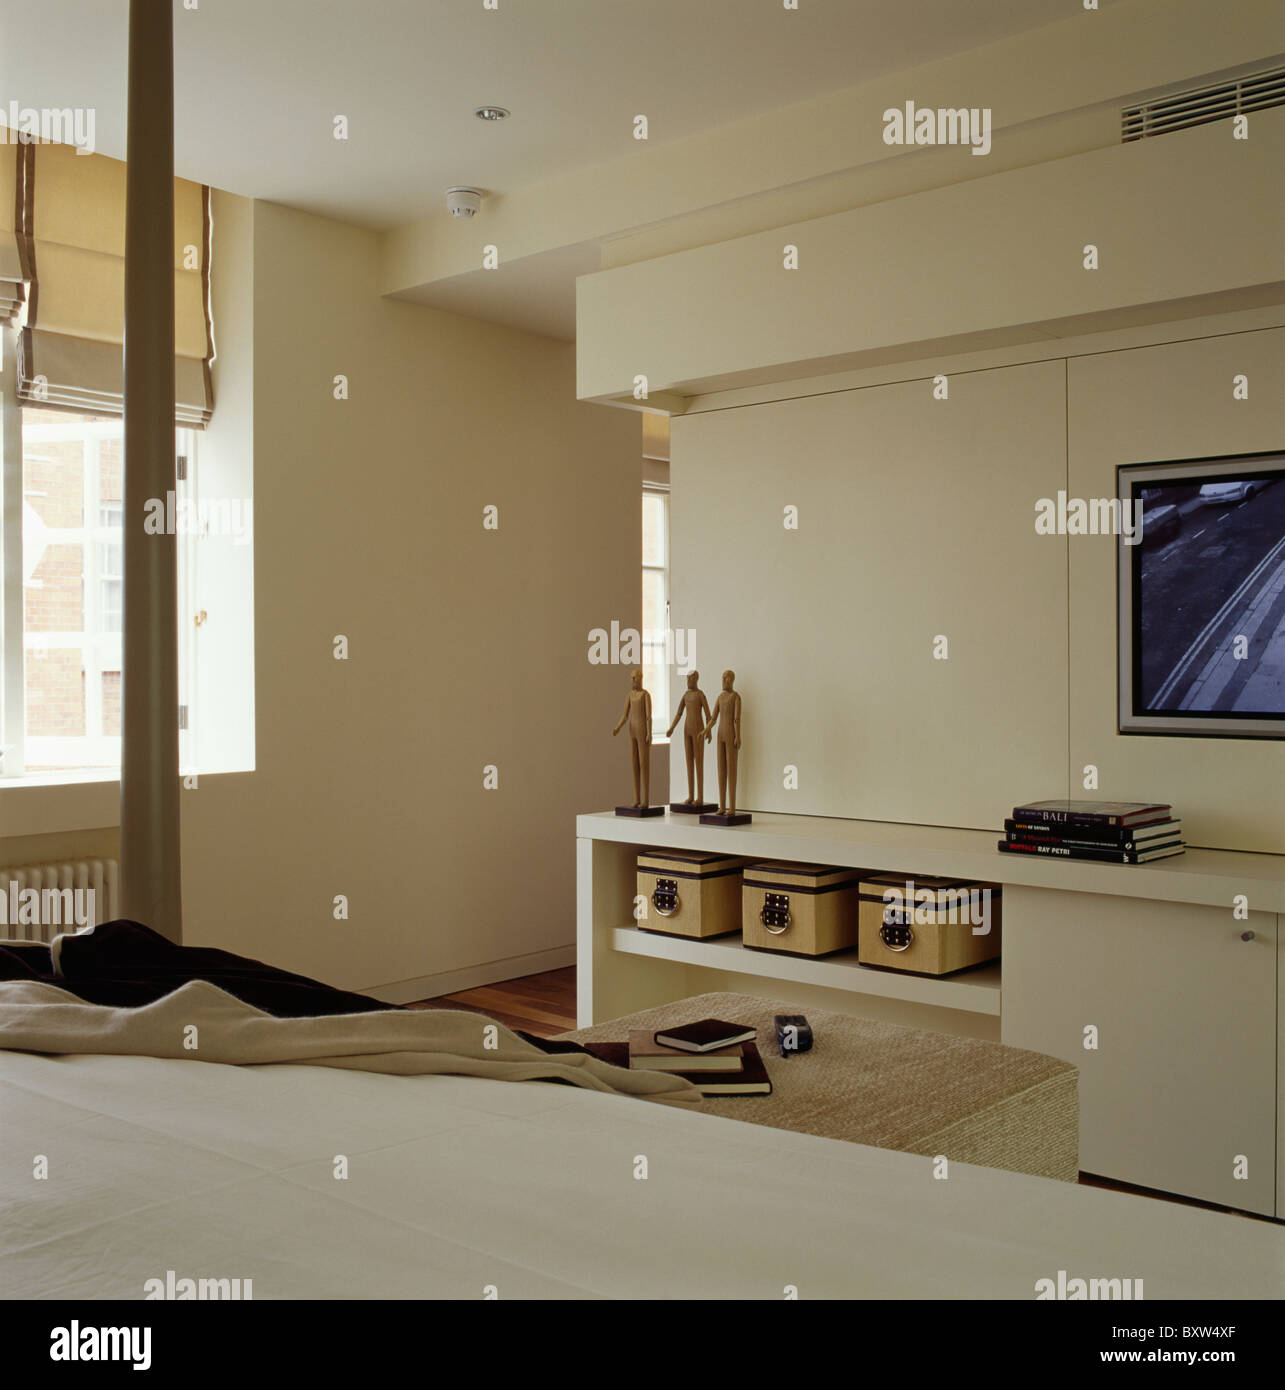 Modern cream townhouse bedroom with storage boxes on shelf of fitted cream unit Stock Photo